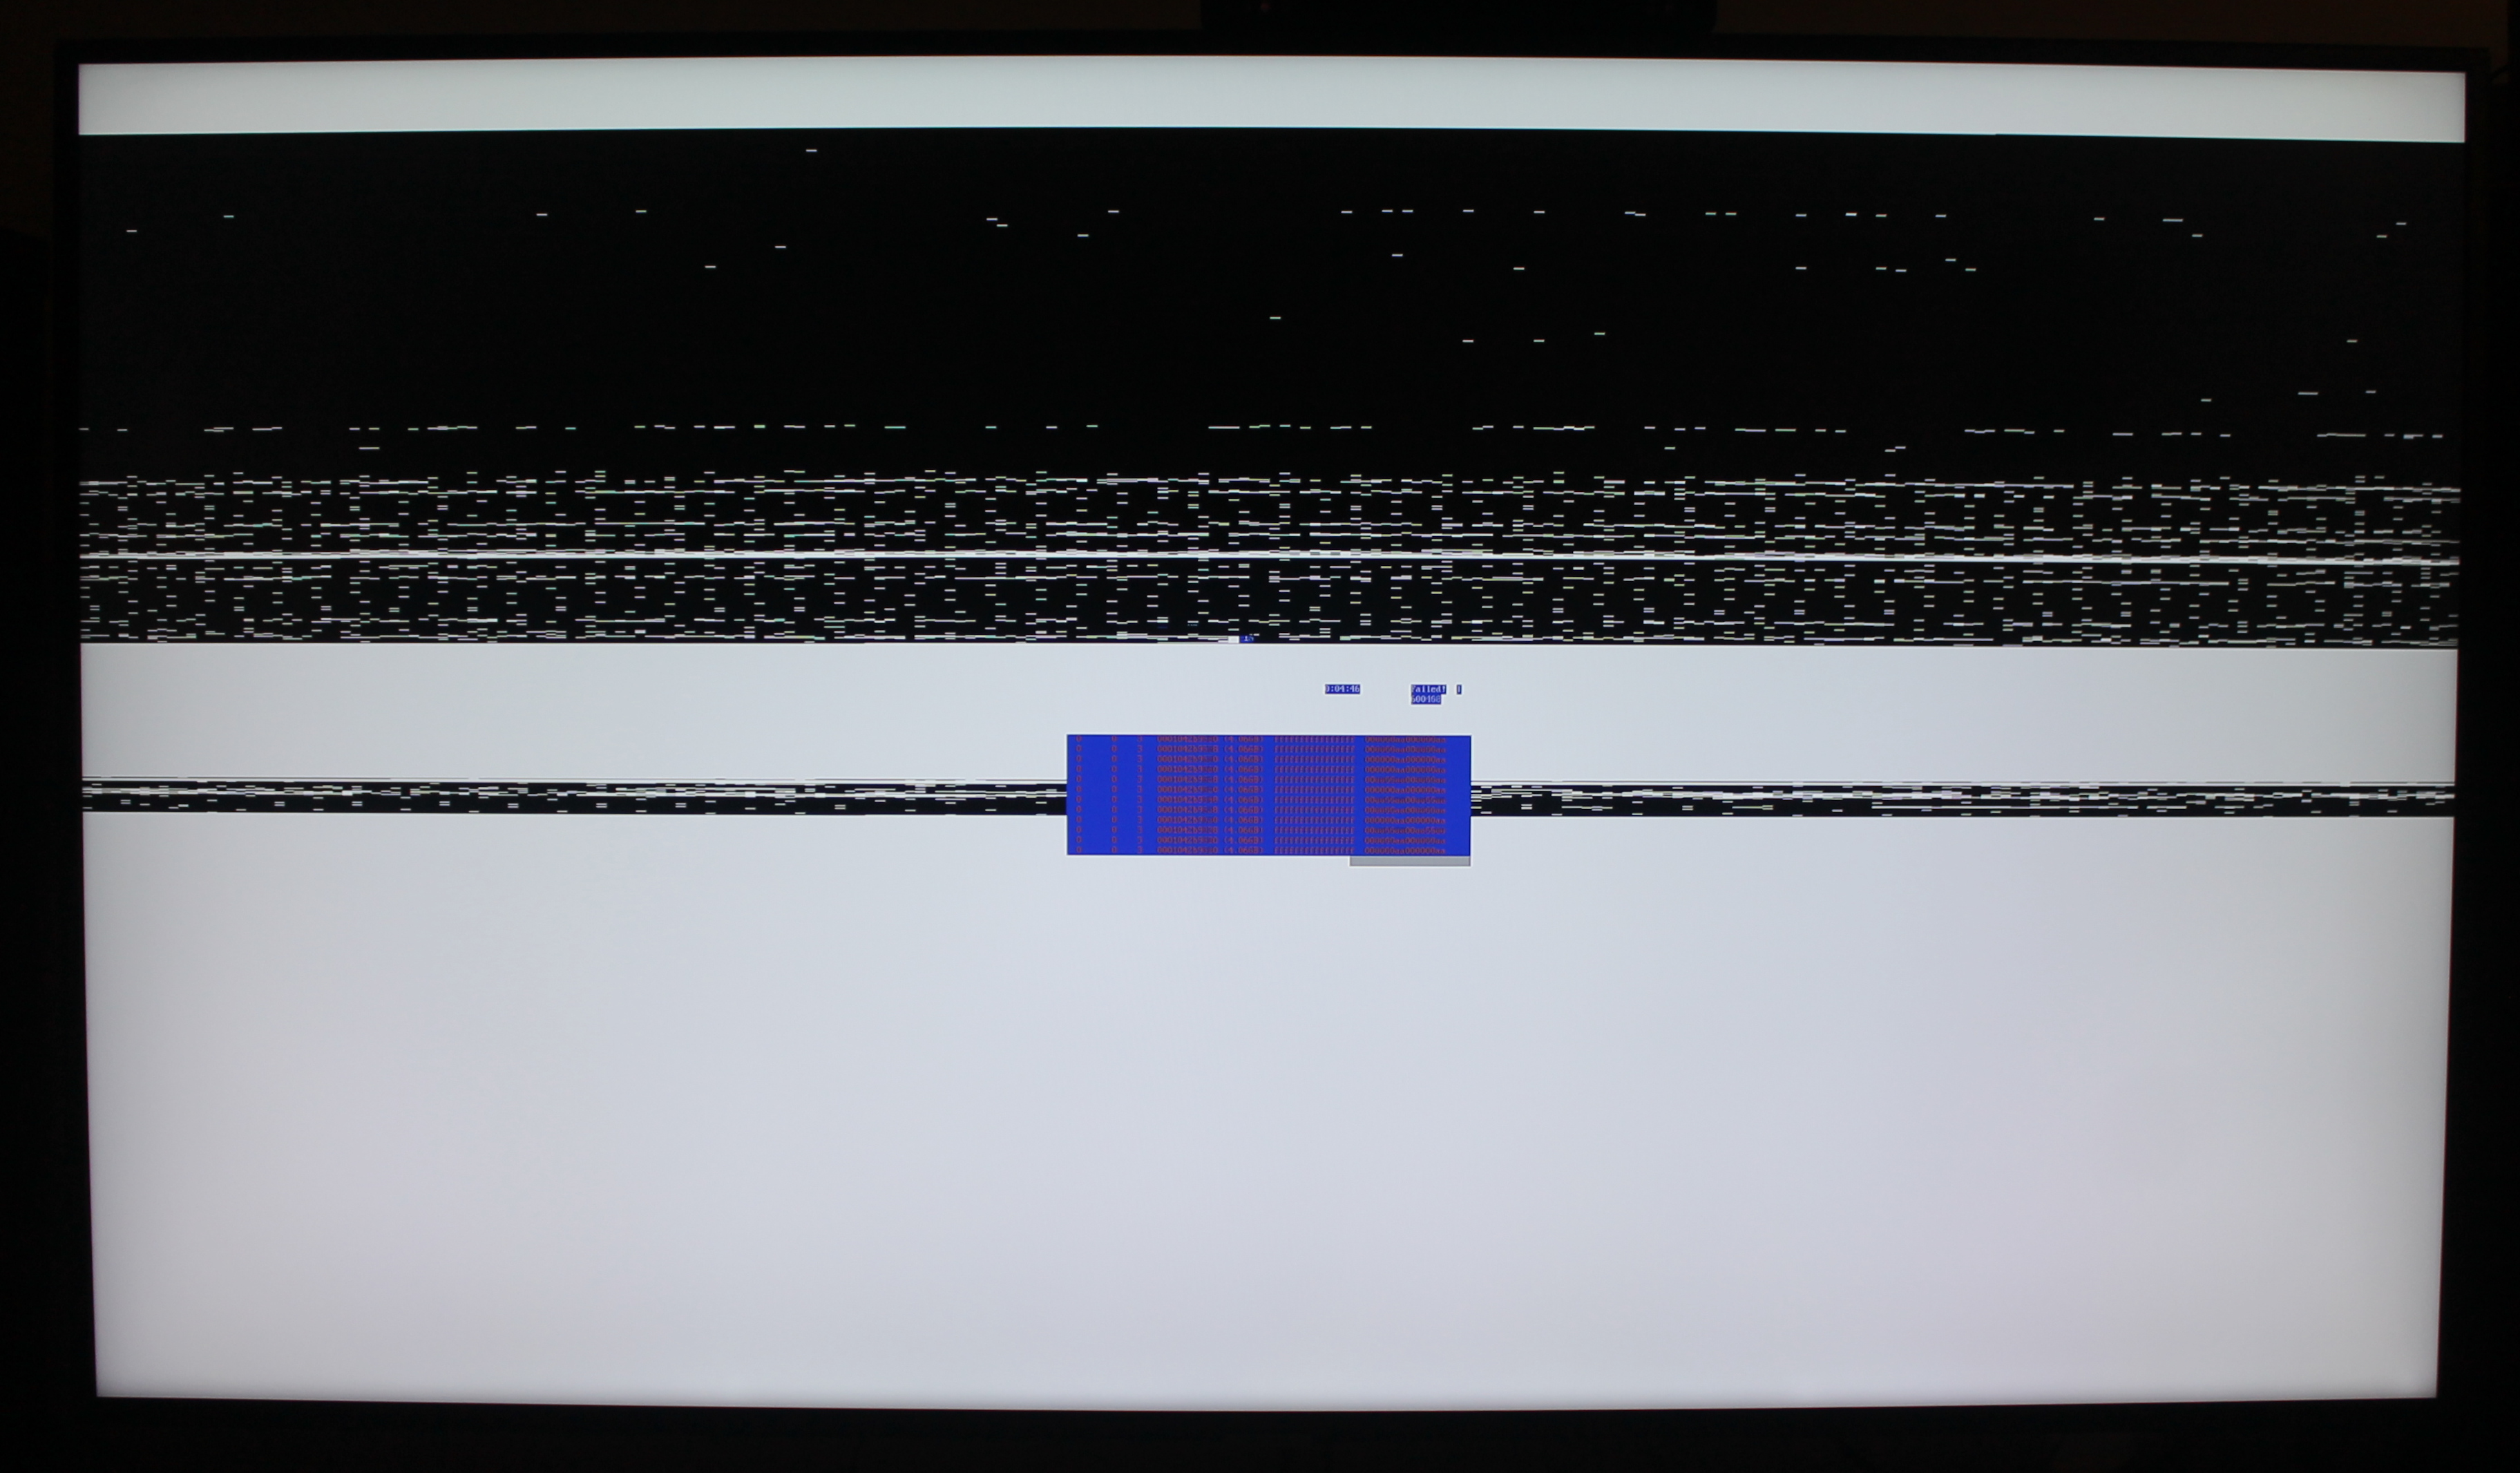 Photo of 4K TV showing partial memtest86+ output in front of bands of black and white. Horizontal white fragments appear in the black bands.